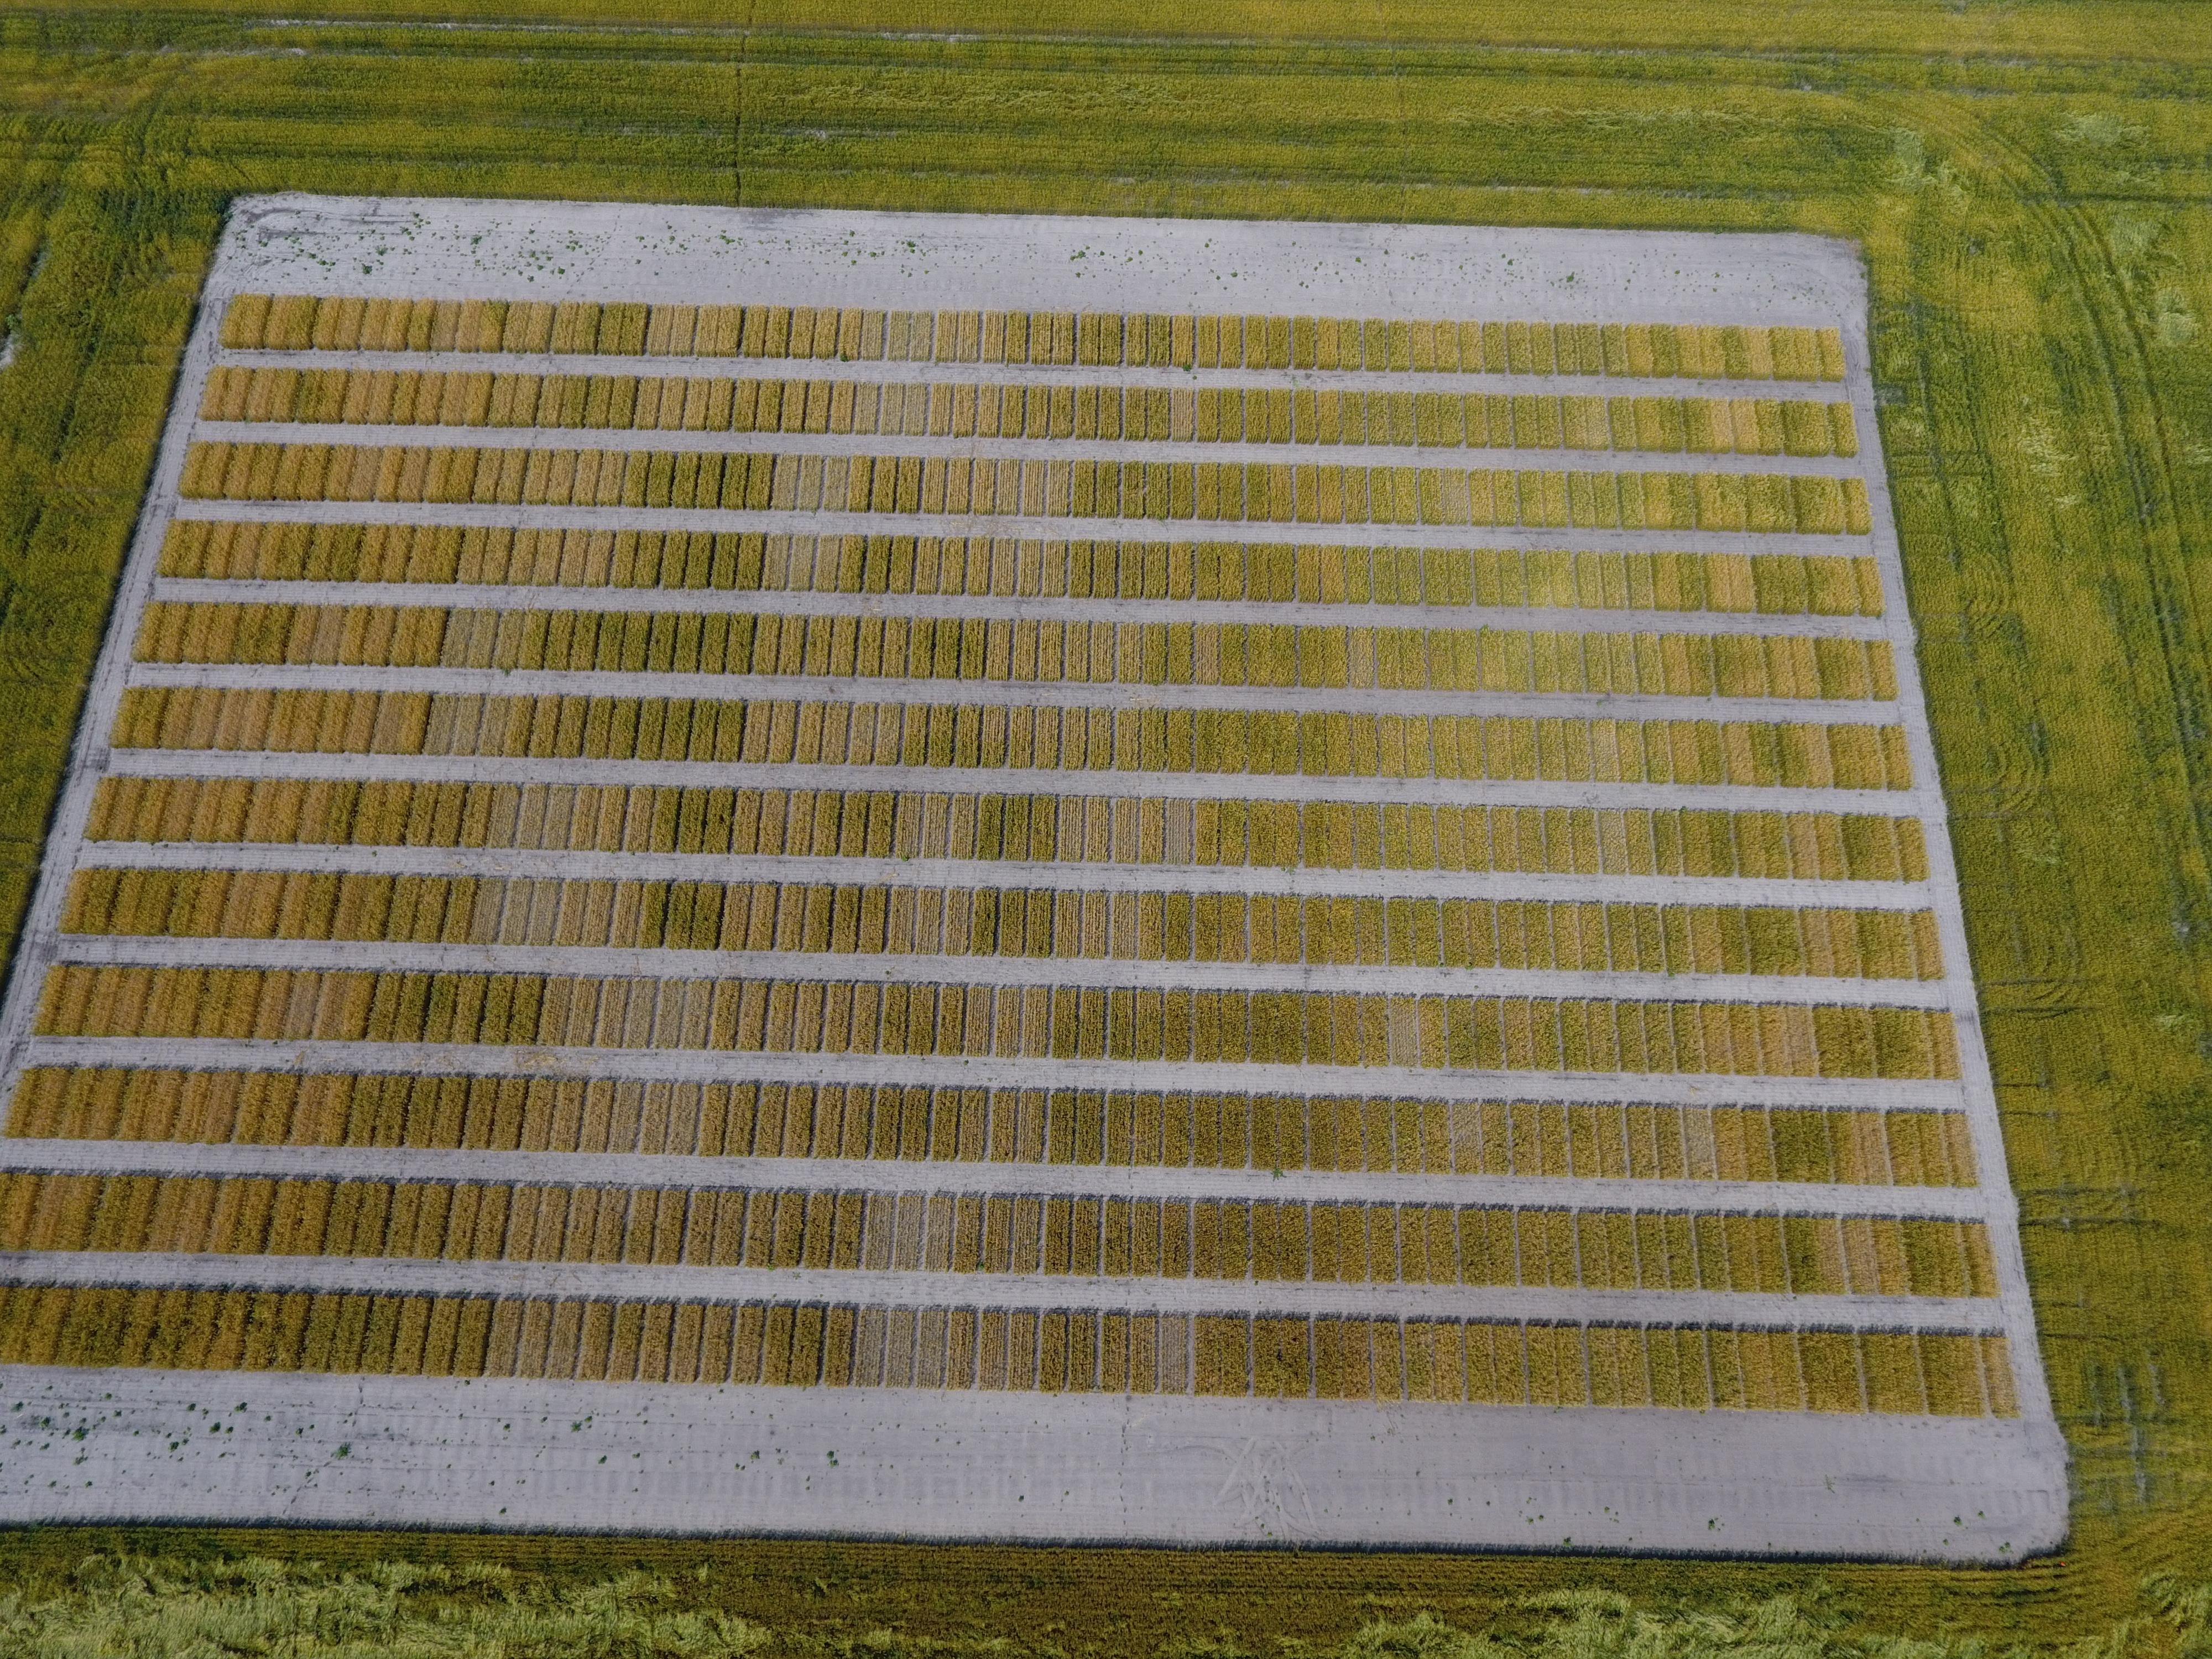 An aerial view of a wheat variety plot shows the multitude of varieties being tested. (NDSU Photo)